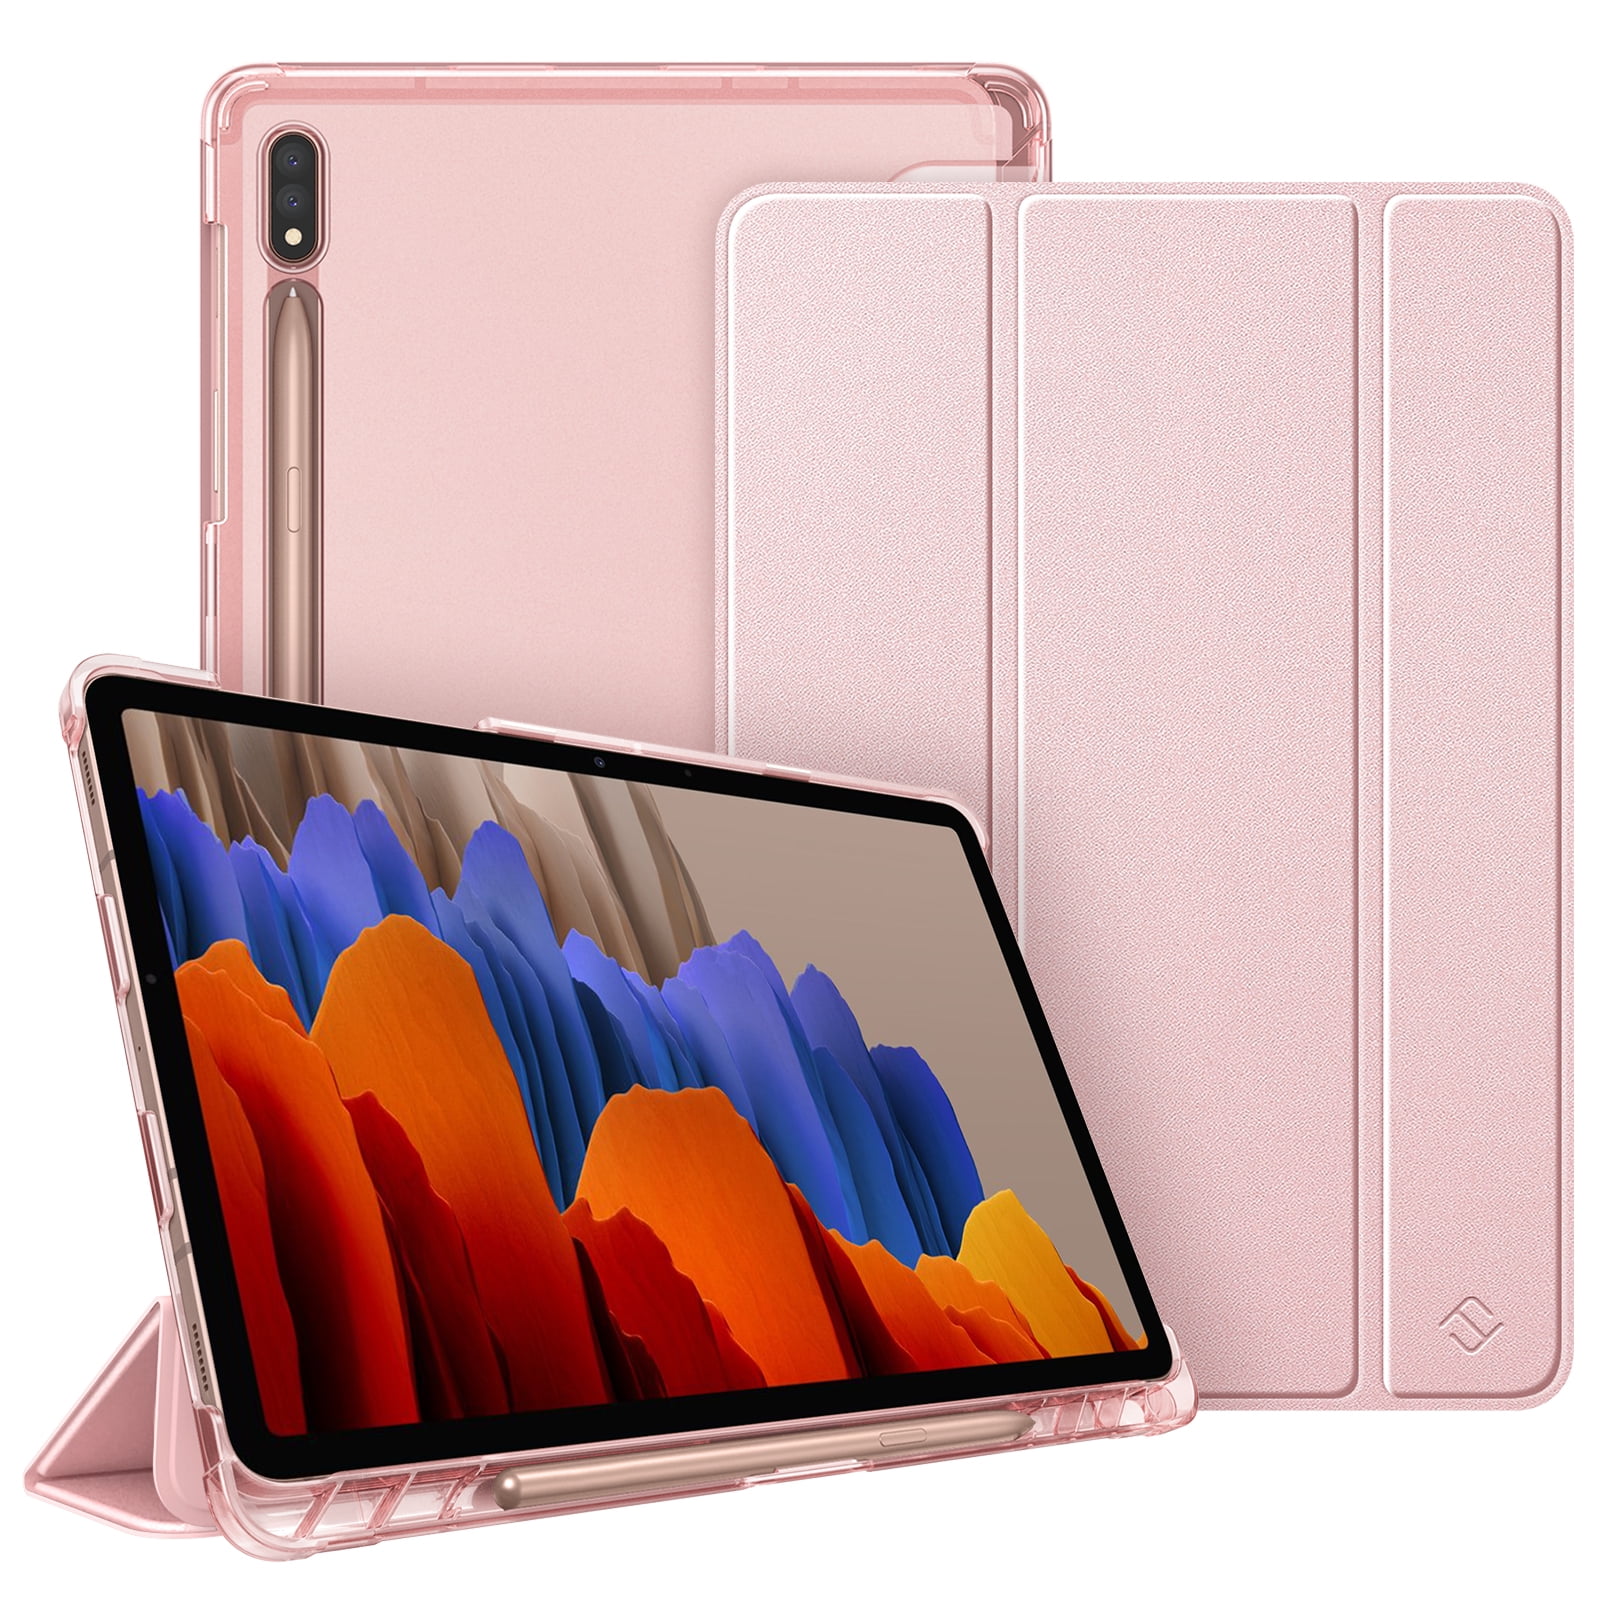 Slim Case for Samsung Galaxy Tab S7 11'' 2020 Model SM-T870(Wi-Fi) SM-T875(LTE) with S Pen Holder, Fintie Lightweight Translucent Frosted Back Cover Stand, Auto Wake/Sleep